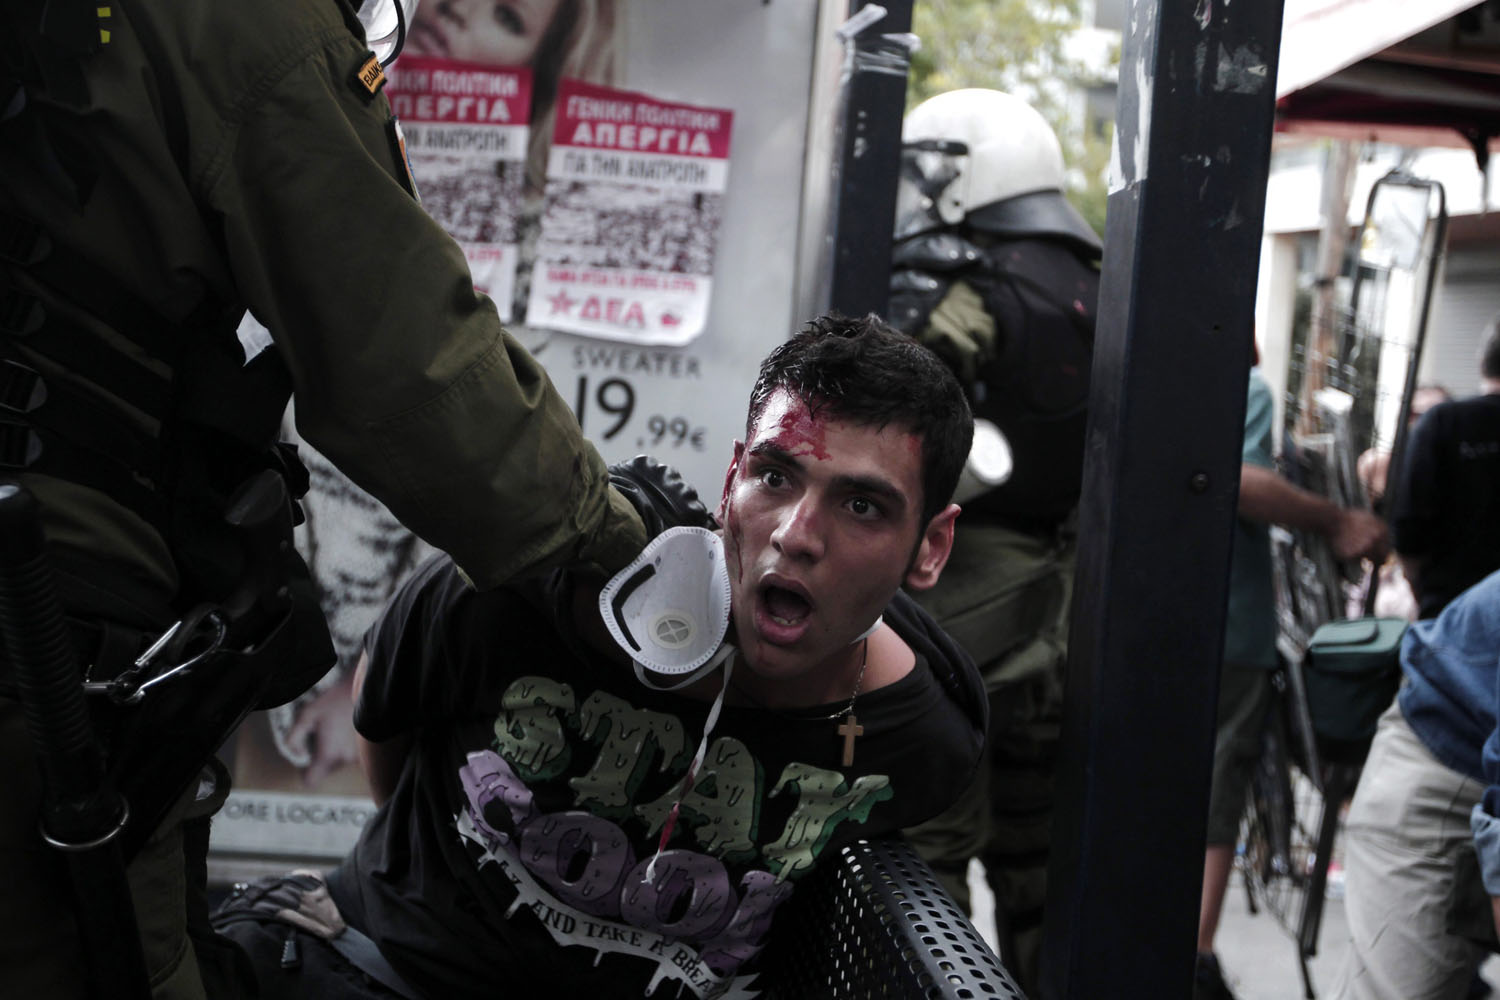 Oct. 9, 2012. Protesters clash with riot policemen in front of the Parliament building in Athens. German Chancellor Angela Merkel praised the Greek government for making progress in implementing tough reforms and said more could be done to reduce the country's deficit. As the two leaders met, police clashed with protesters angry at painful austerity measures for which they blame Merkel.